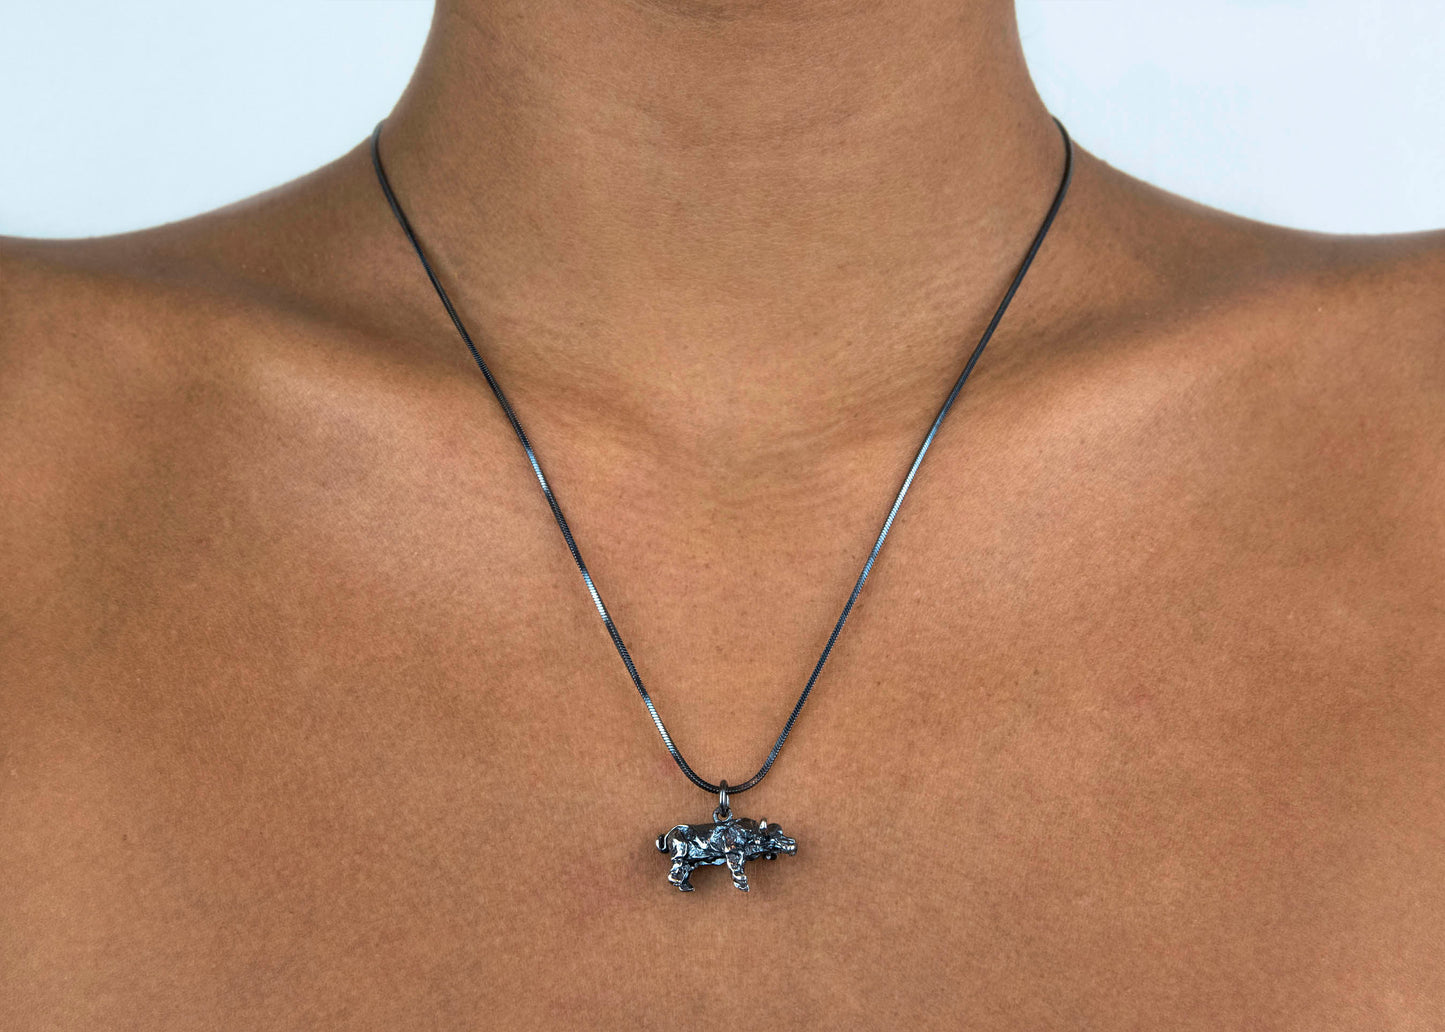 Buffalo Origami with Snake Chain Necklace